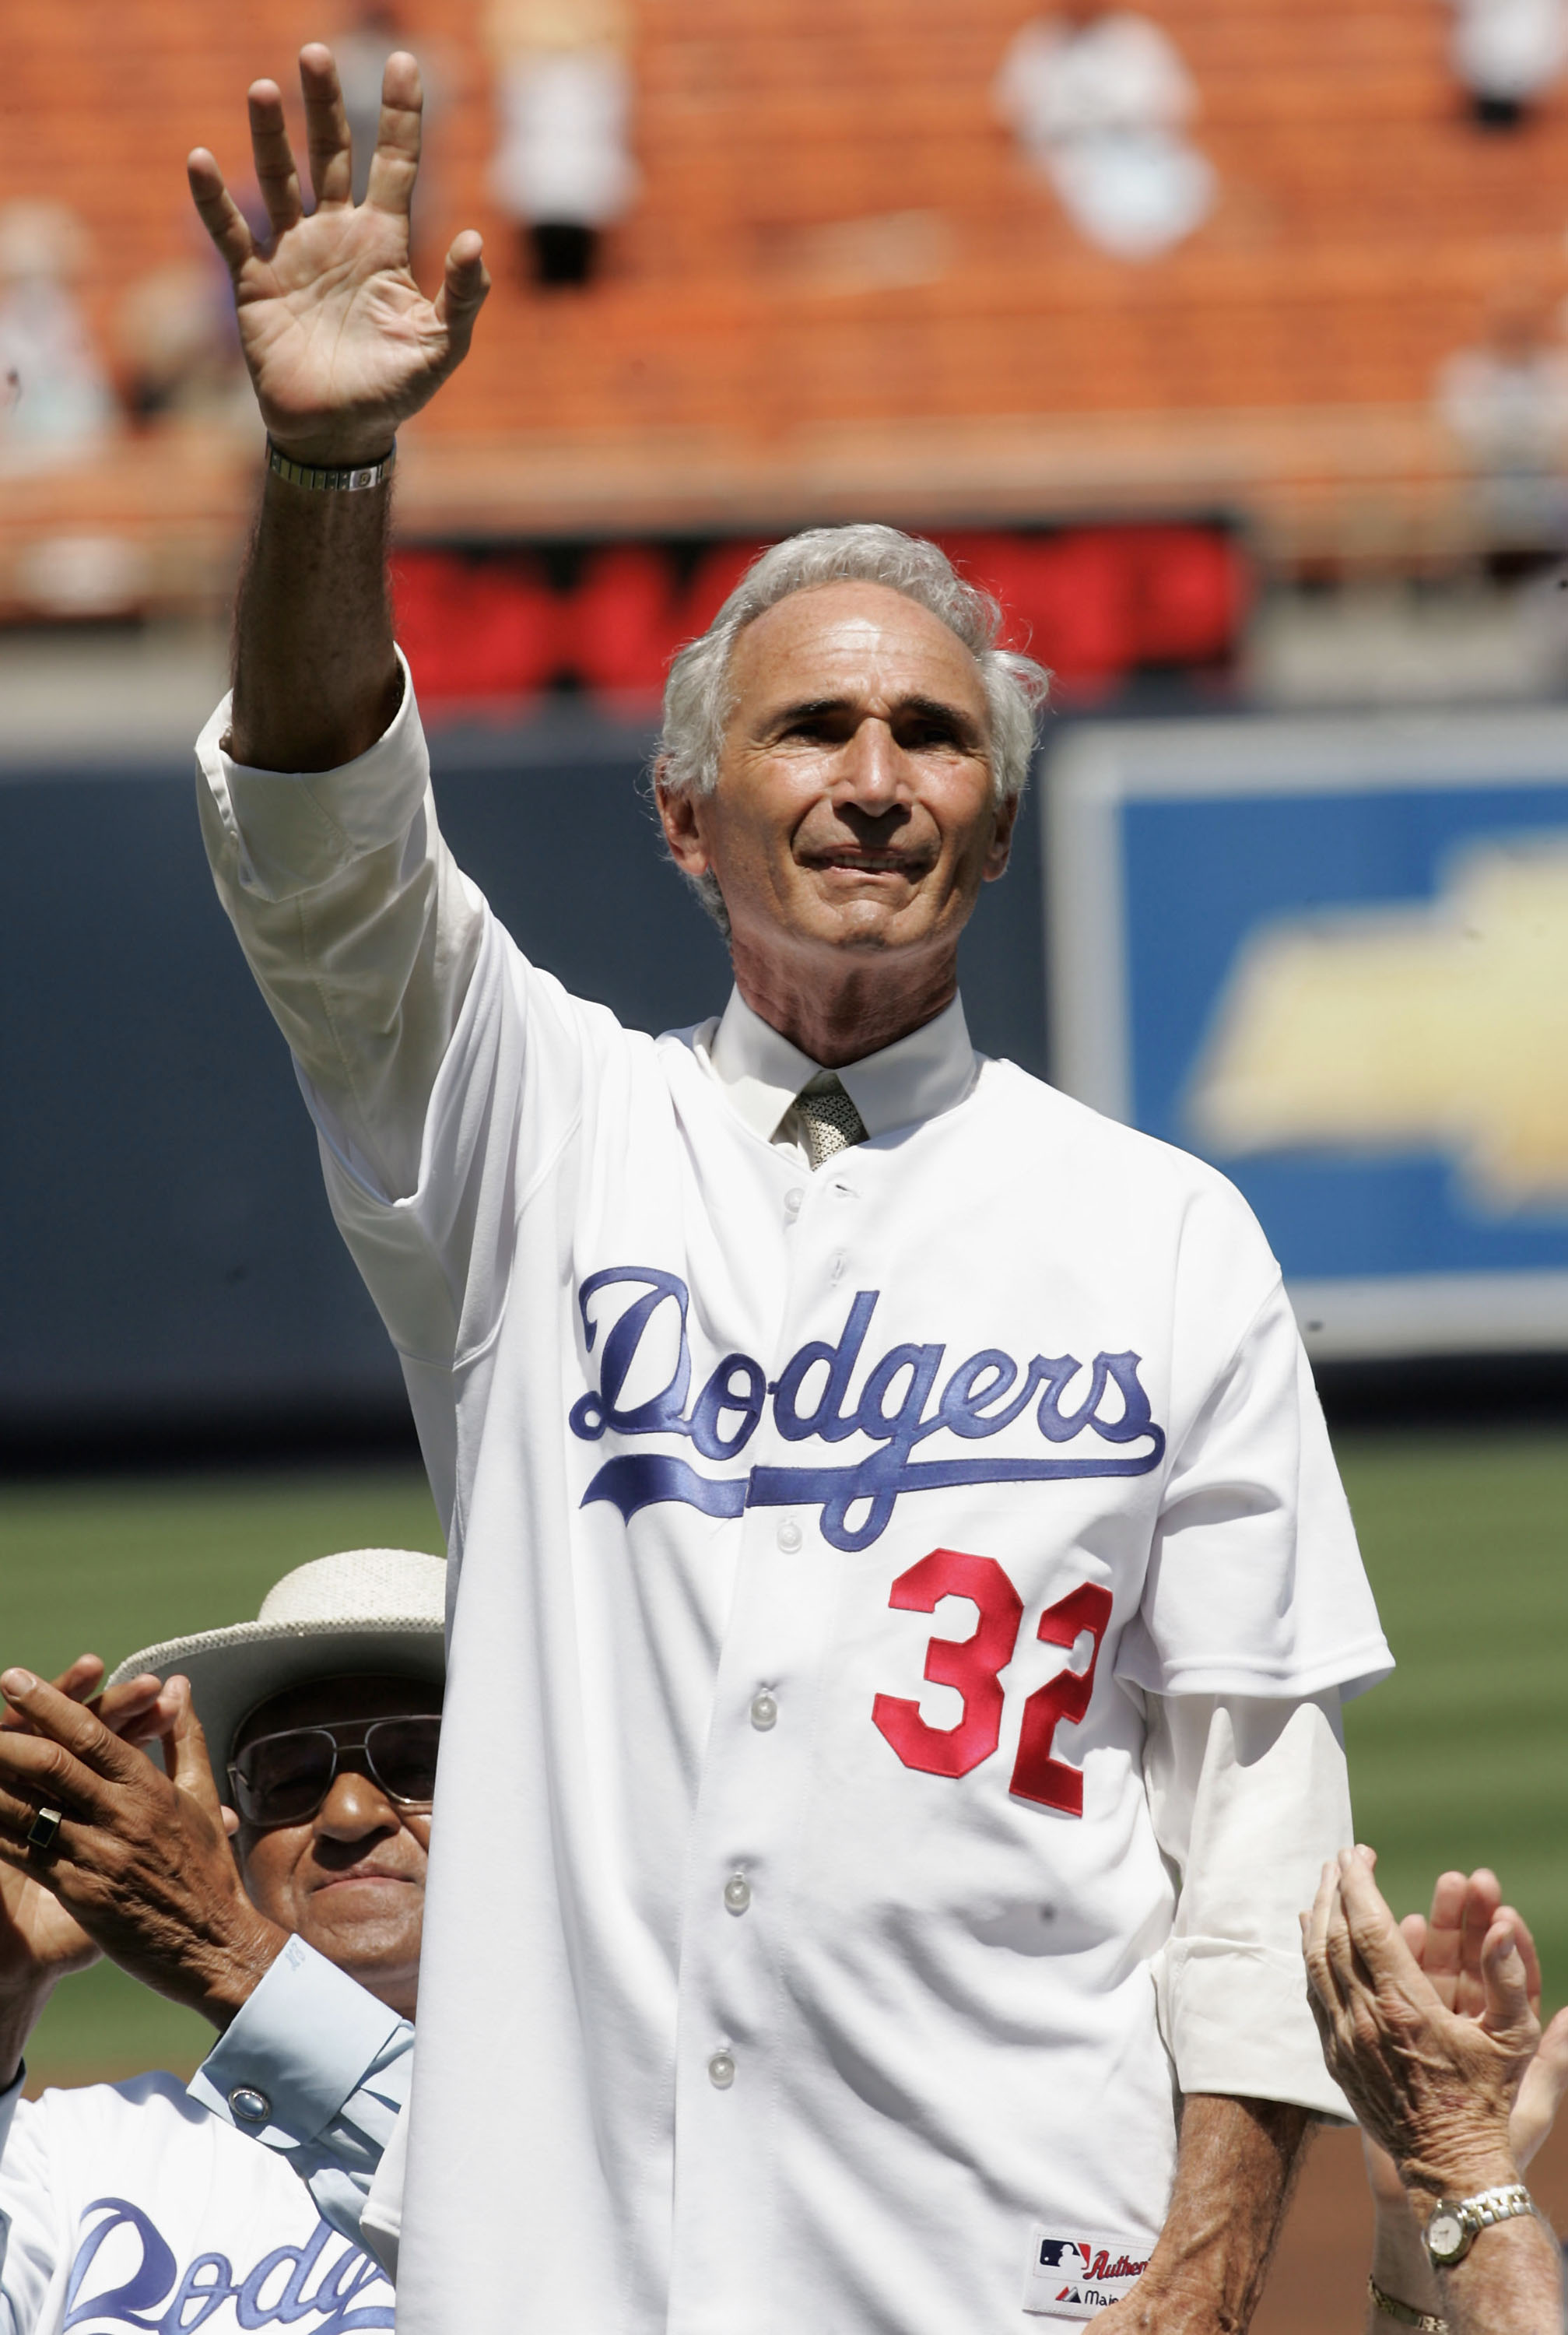 LOS ANGELES - AUGUST 28: Hall of Fame pitcher Sandy Koufax of the Los Angeles Dodgers waves to the crowd during ceremonies honoring memebers of the 1955 World Champion Dodgers before the game with the Houston Astros on August 28, 2005 at Dodger Stadium in